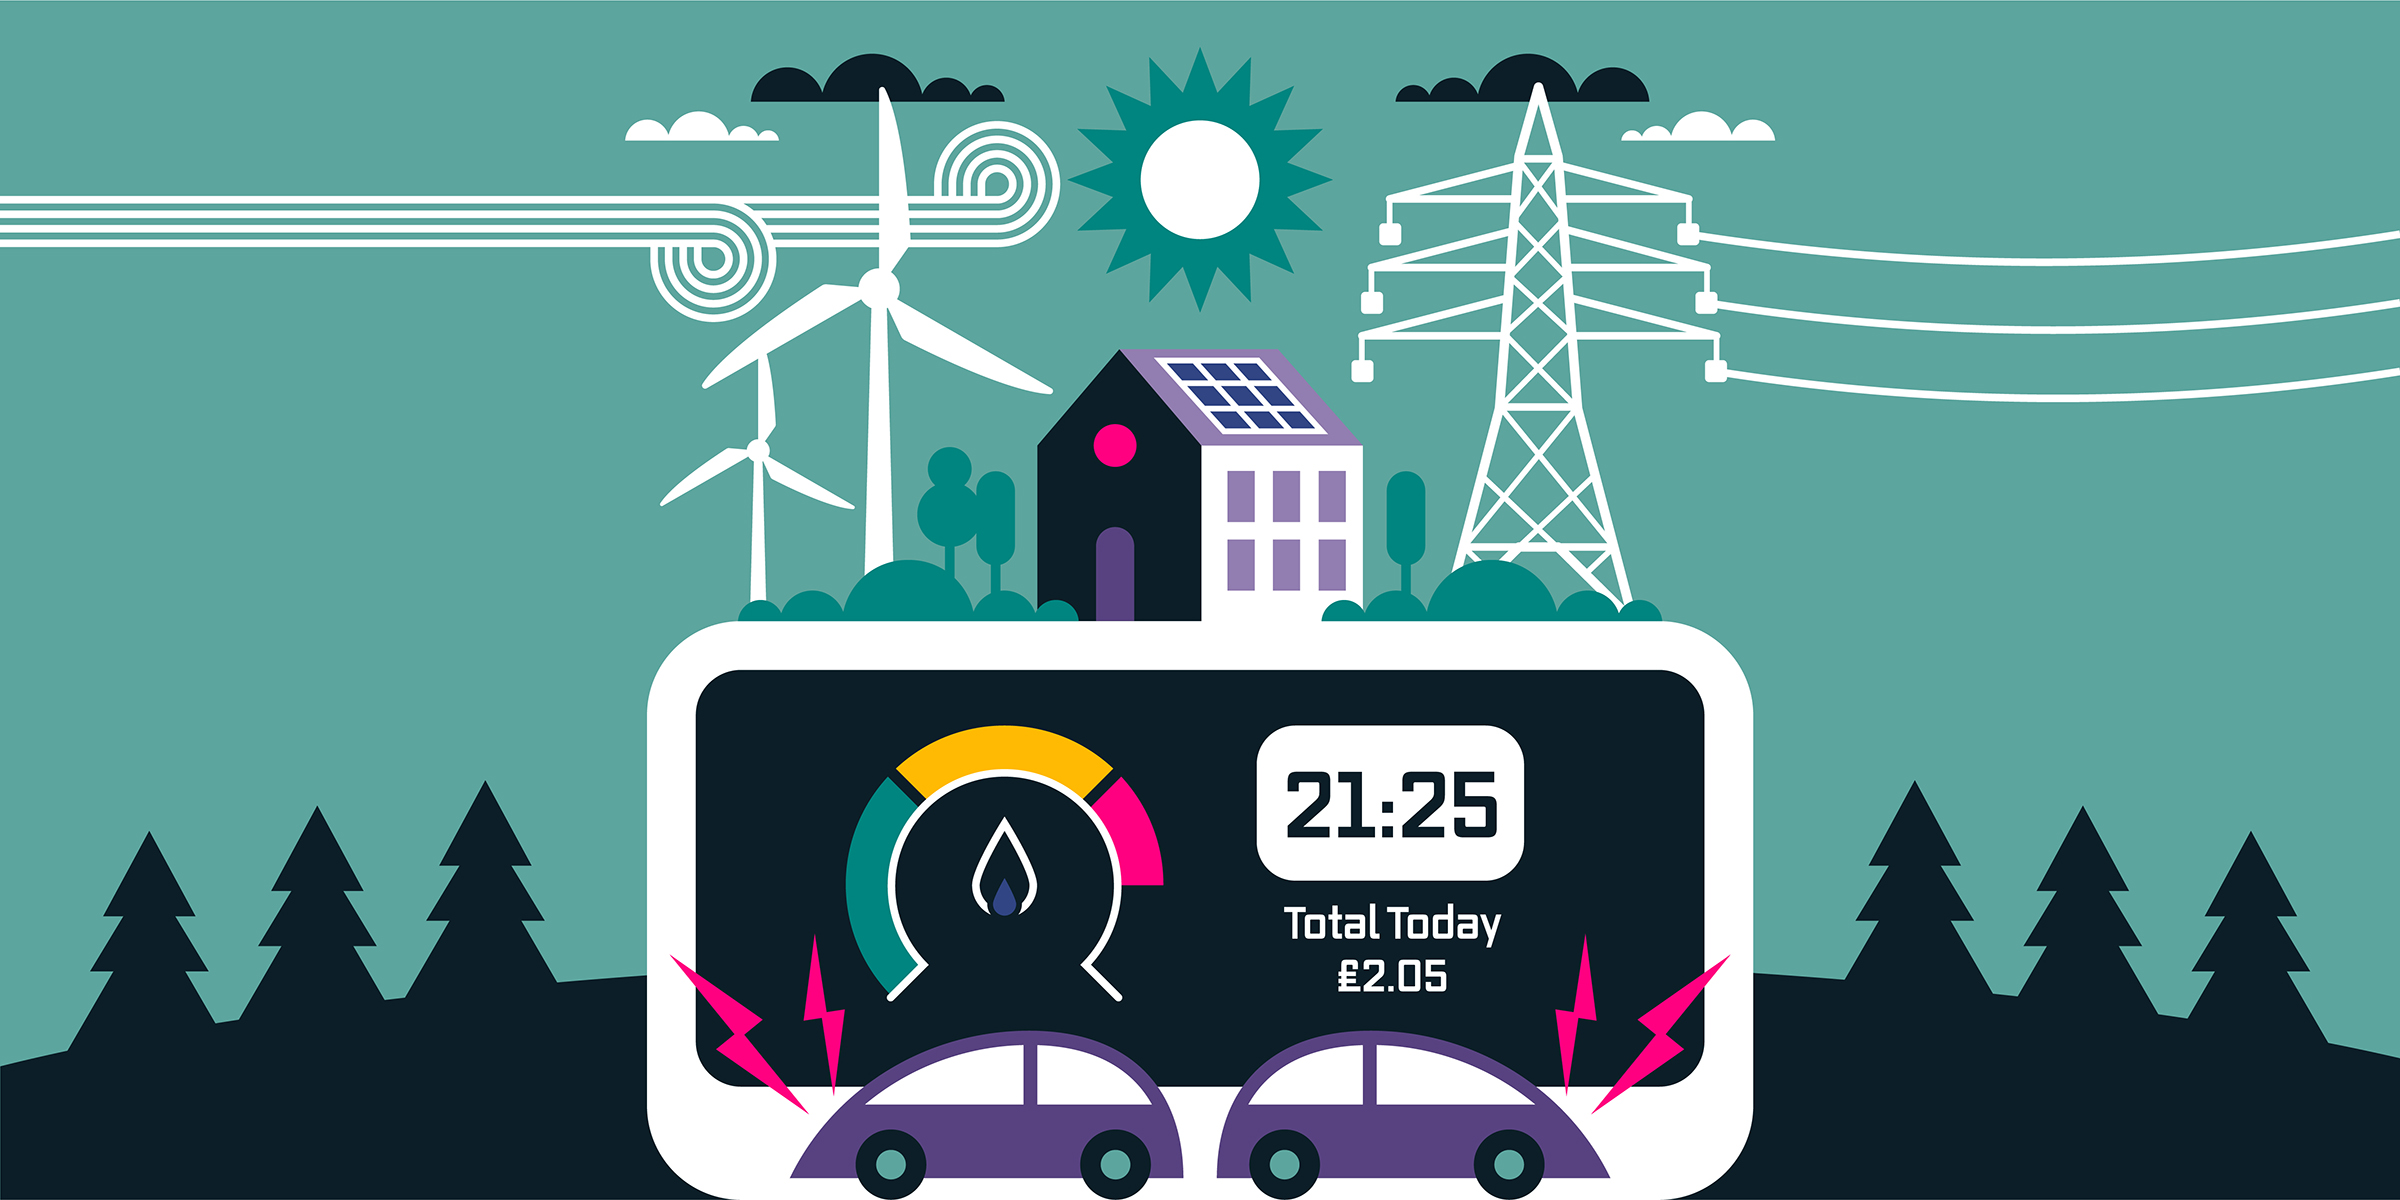 Will smart meters lead to cleaner, greener energy for all?